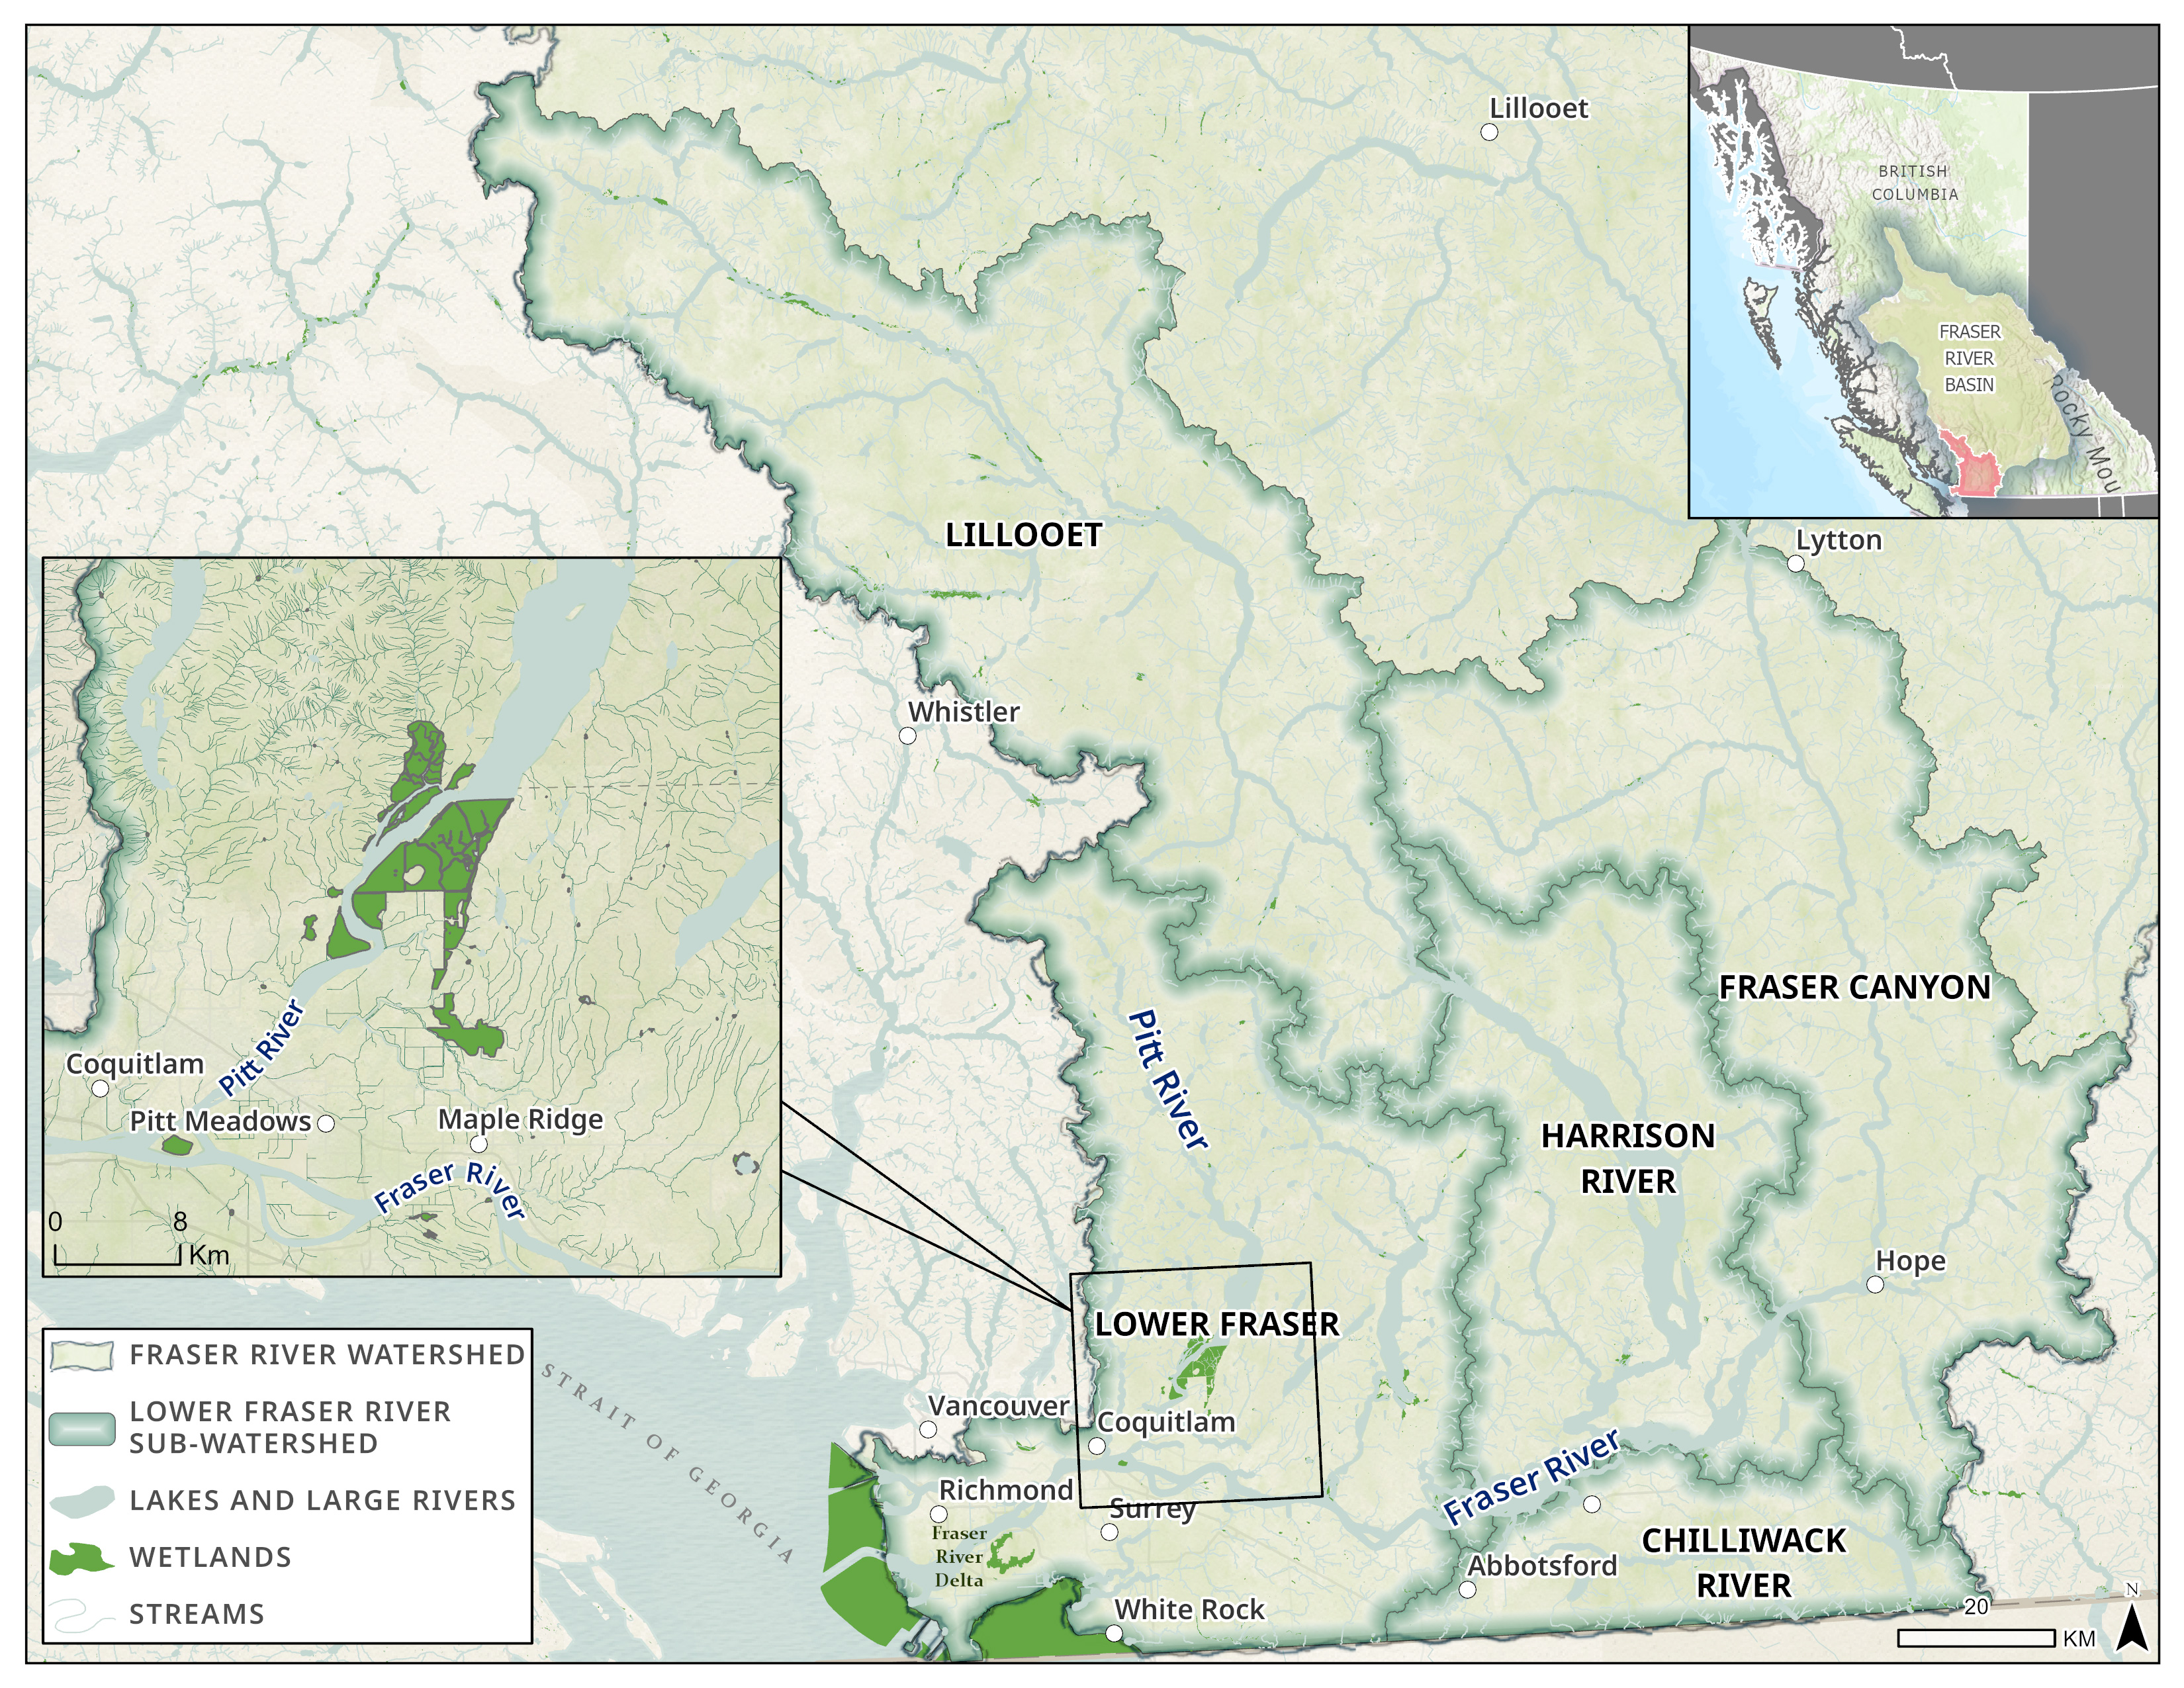 Map showing sub-watersheds of the Lower Fraser: Lower Fraser (southwest), Chilliwack River (south), Harrison River (central), Lillooet (north), and Fraser Canyon (east).